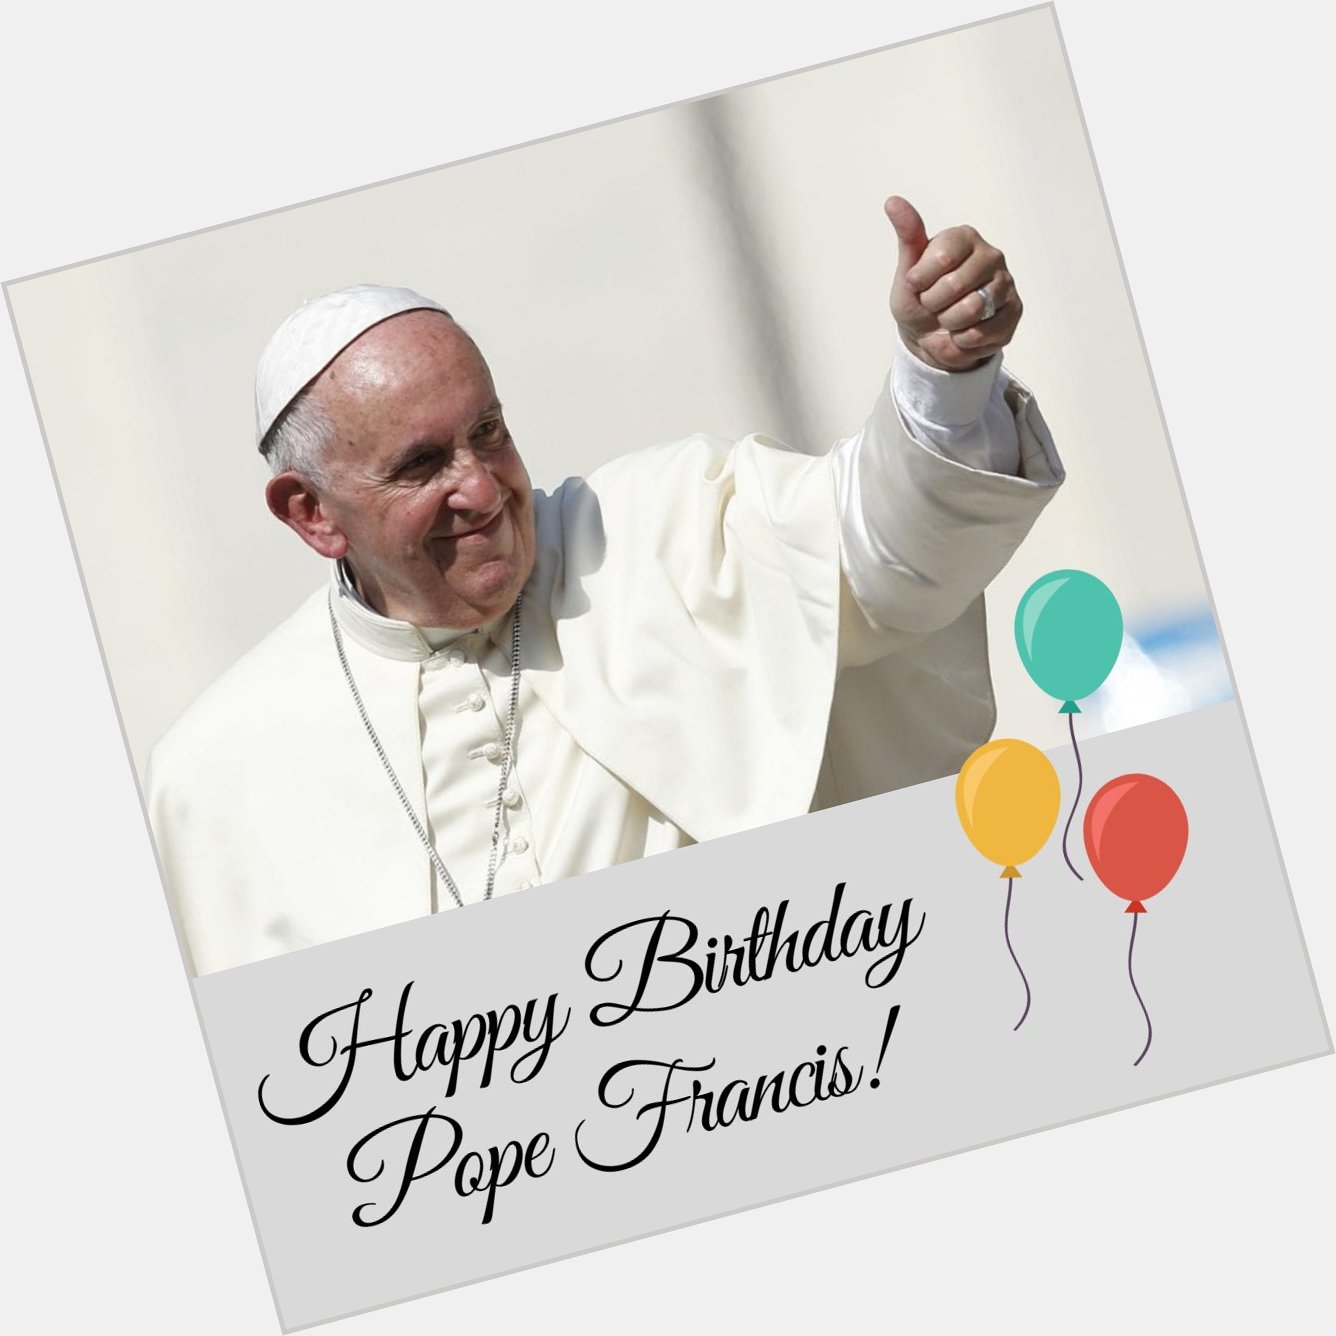 Happy Birthday to Pope Francis from the Diocese of Syracuse! 